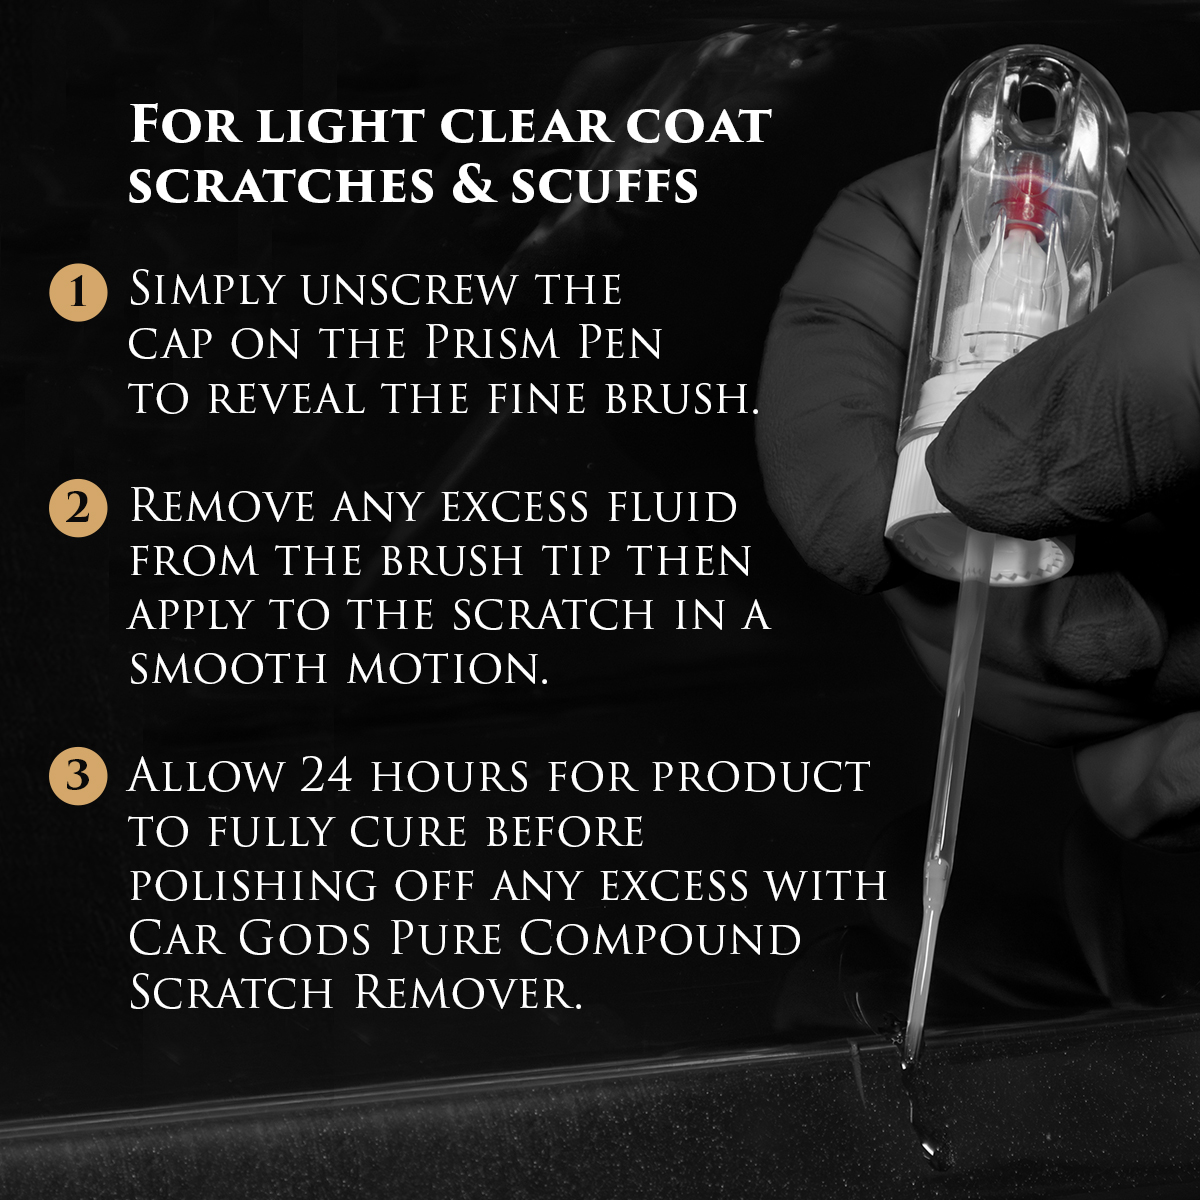 Image shows the Prism Scratch Cover brush being used to cover scratches & scuffs.